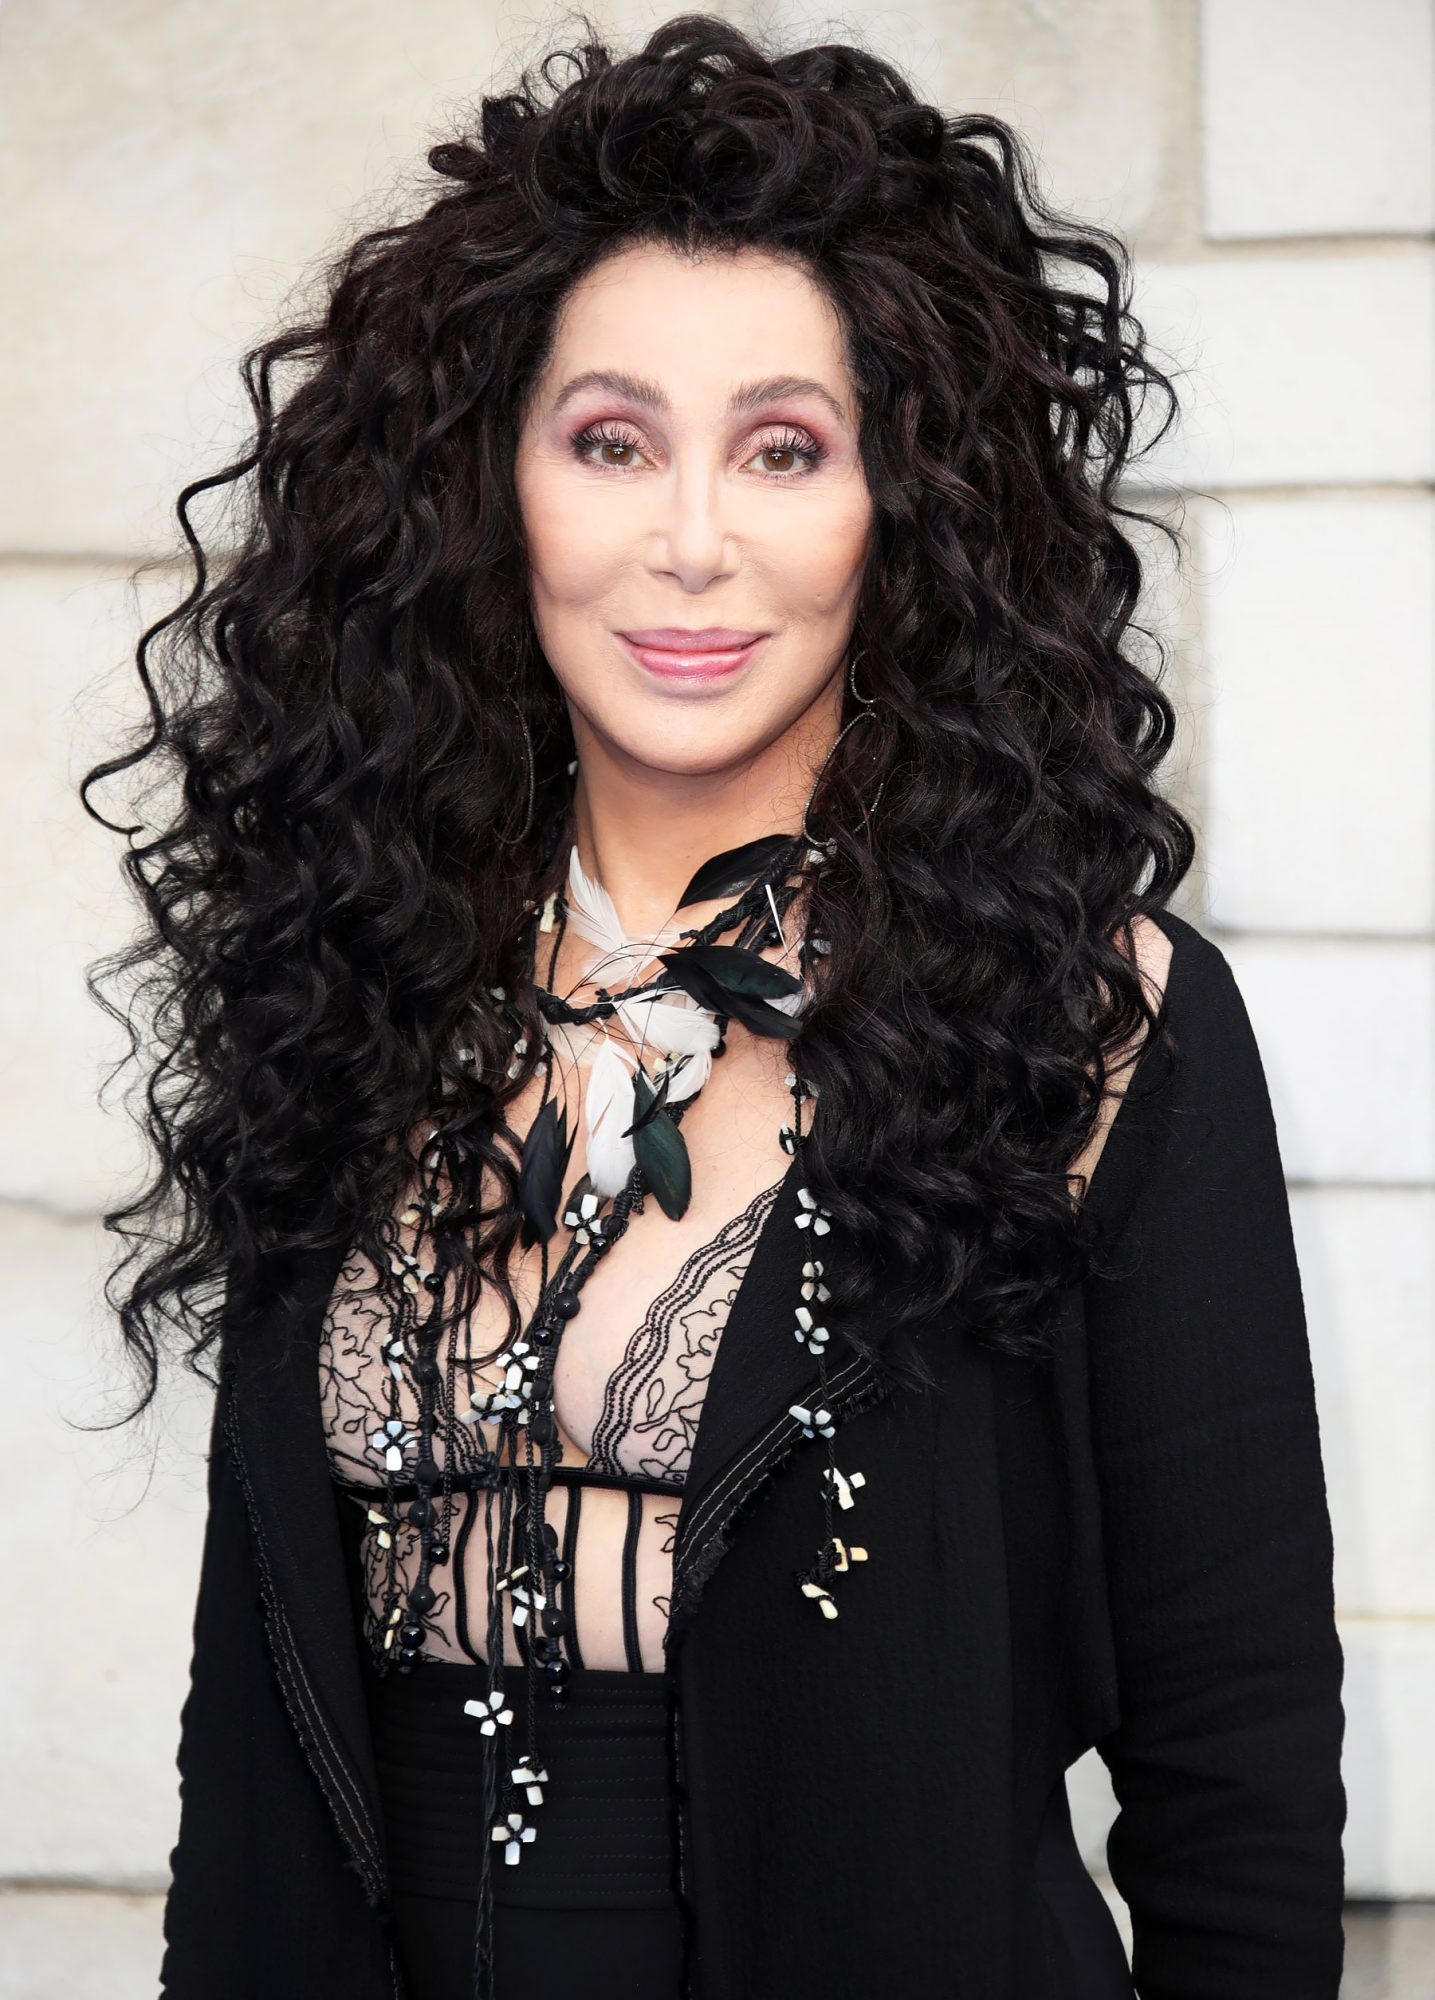 Cher: A famous television personality, singer, cultural icon, and actress. 1440x2000 HD Wallpaper.